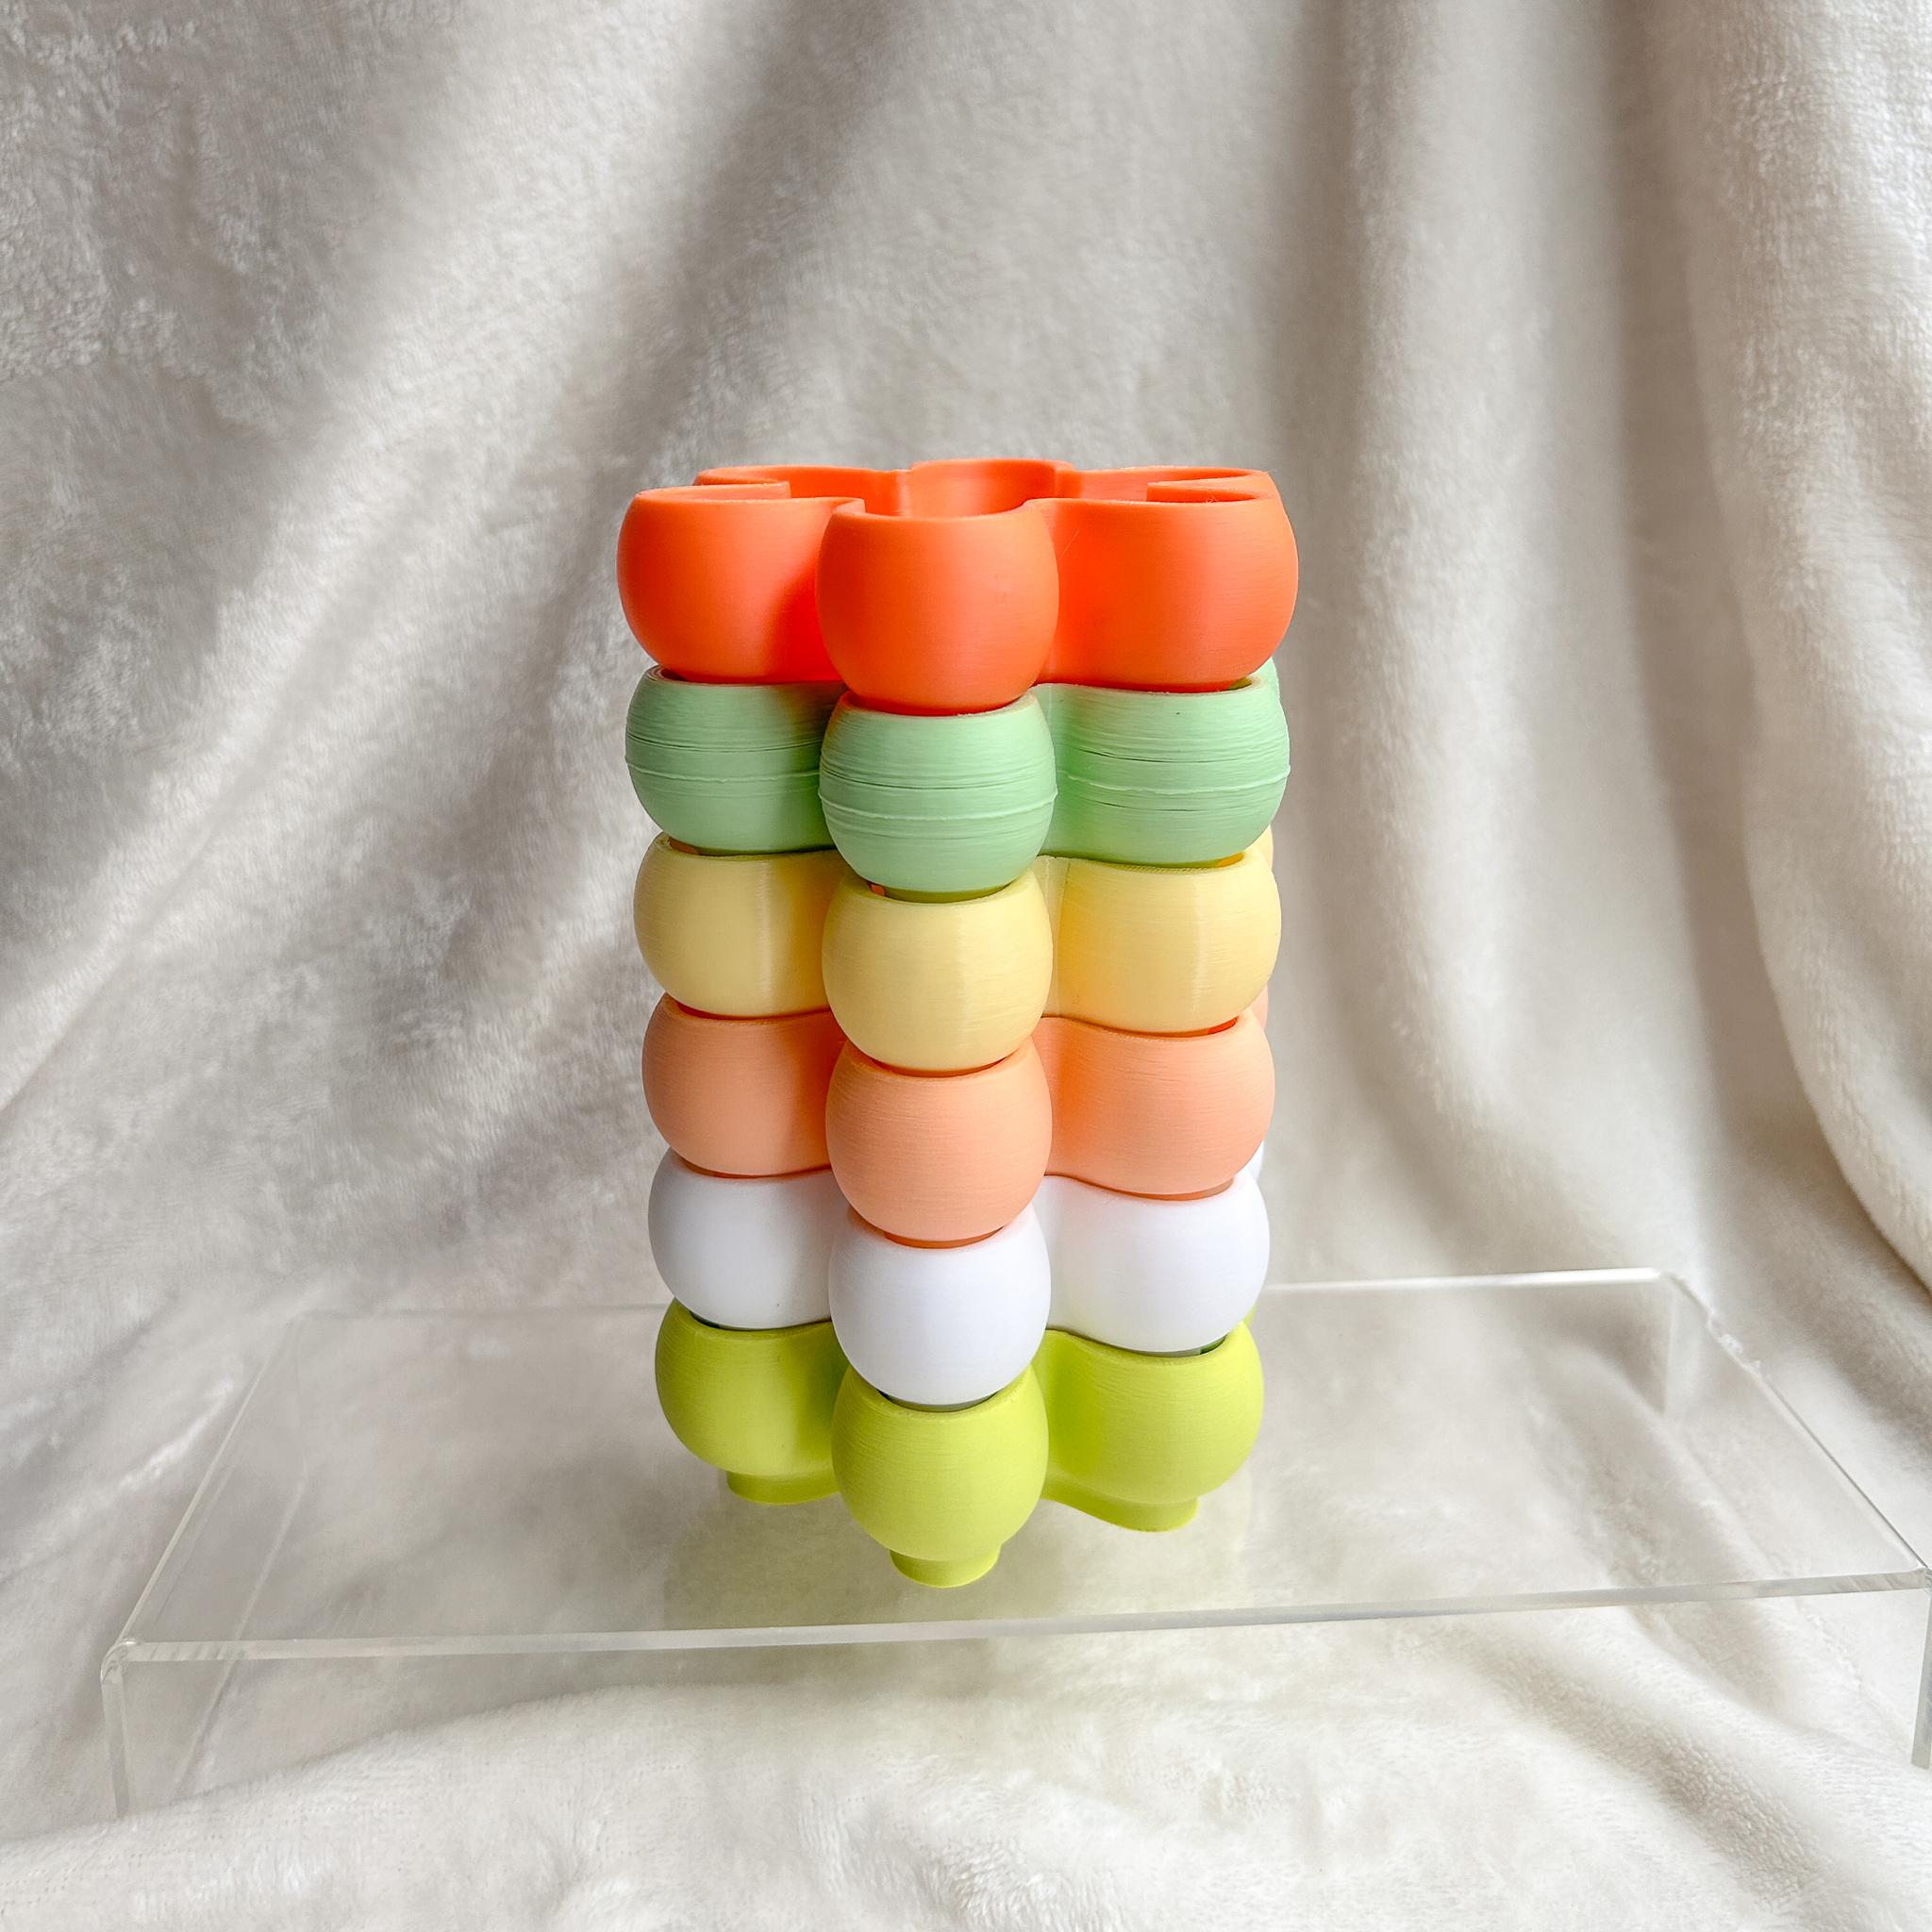 Groovy 70s Stackable Flower Tray: Color-Coding, Space-Saving Organizer for Little Knick-Knacks 3d model